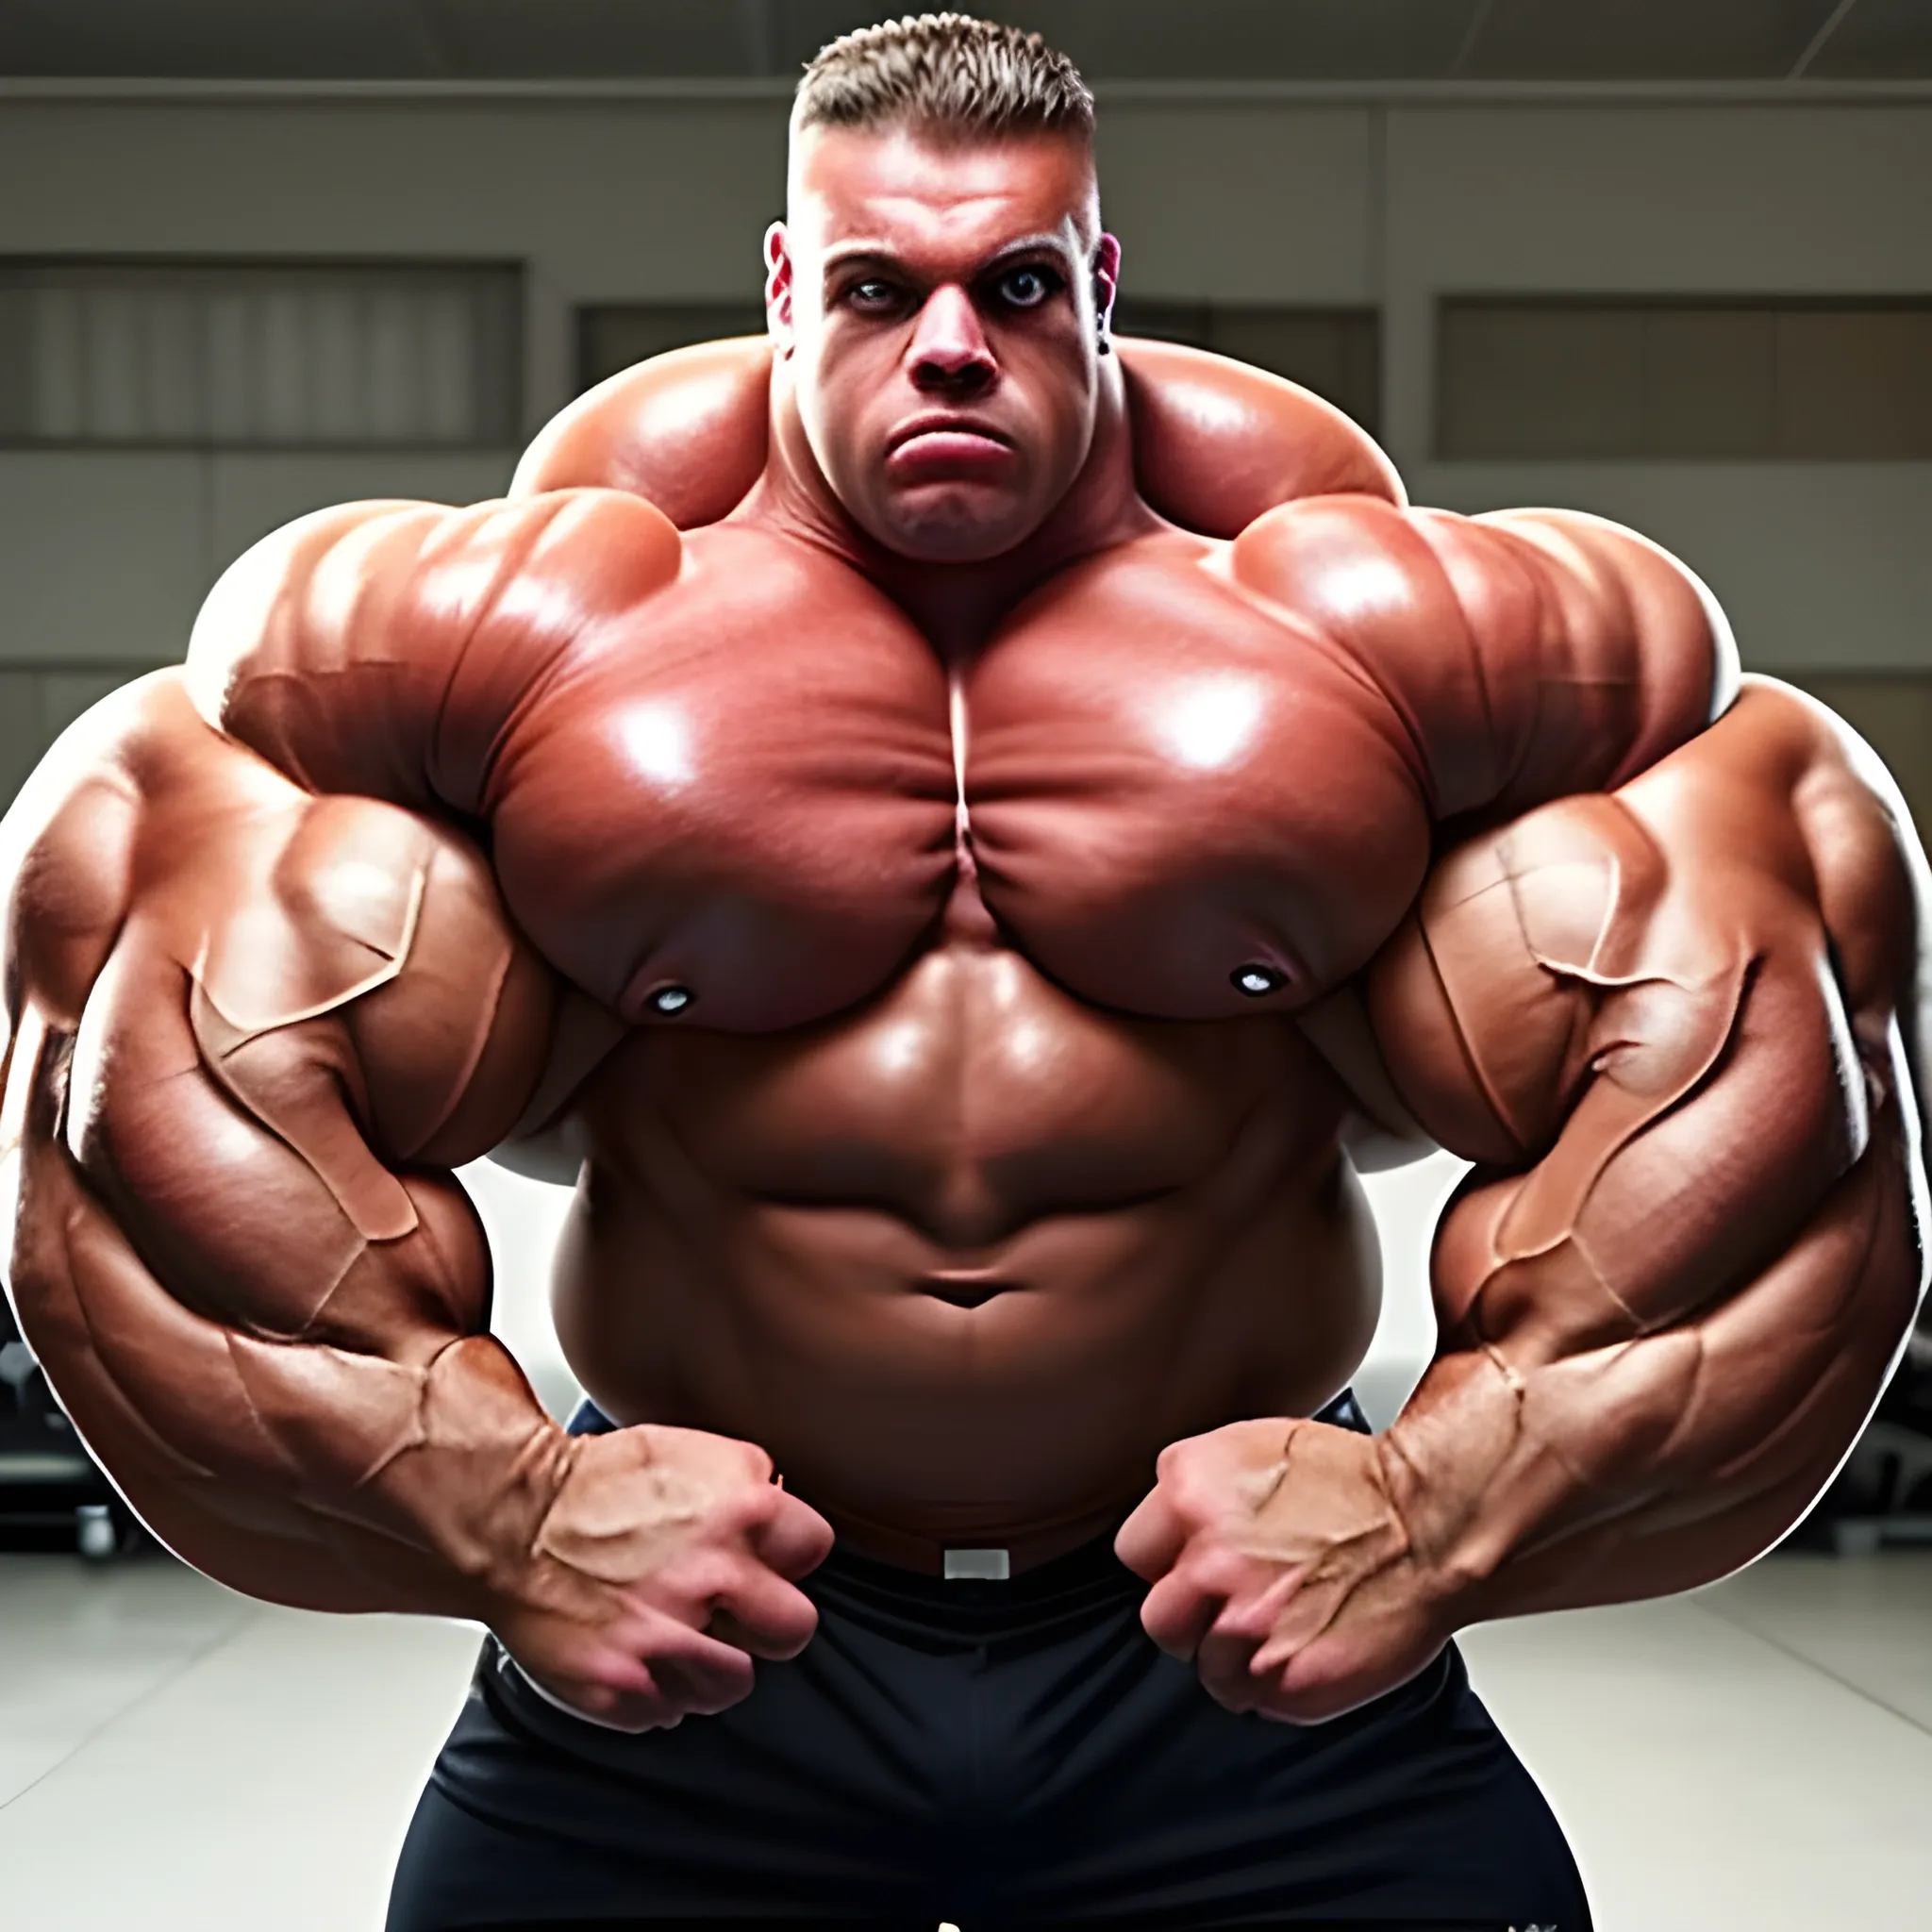 3-meters, beaatiful muscle morph, 3000 lbs bodybuilder, gigantic 300 inches biceps, huge biceps, extremely huge muscular arms, 300 inches enormous triceps, enormous forearms, gigantic traps, 300 inches chest, 
